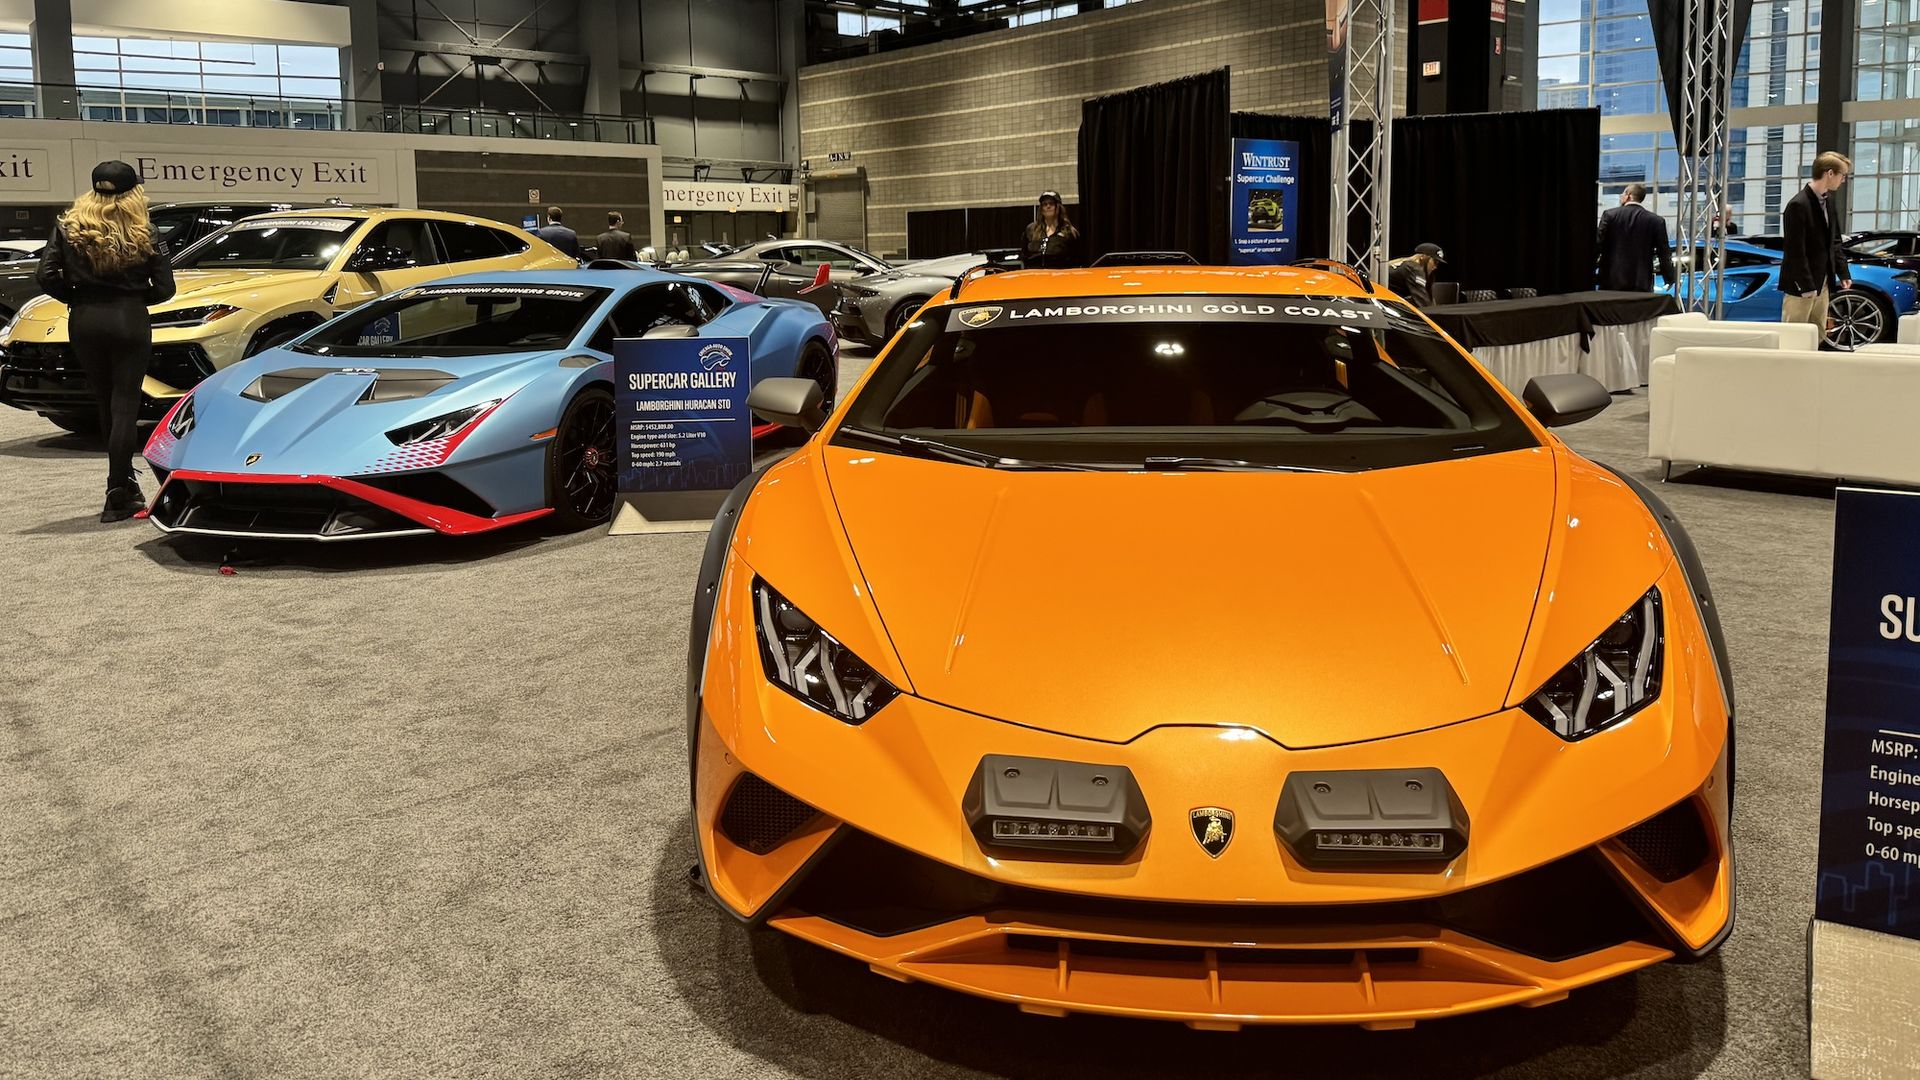 The front of an orange sports car with a blue sports car in the background.